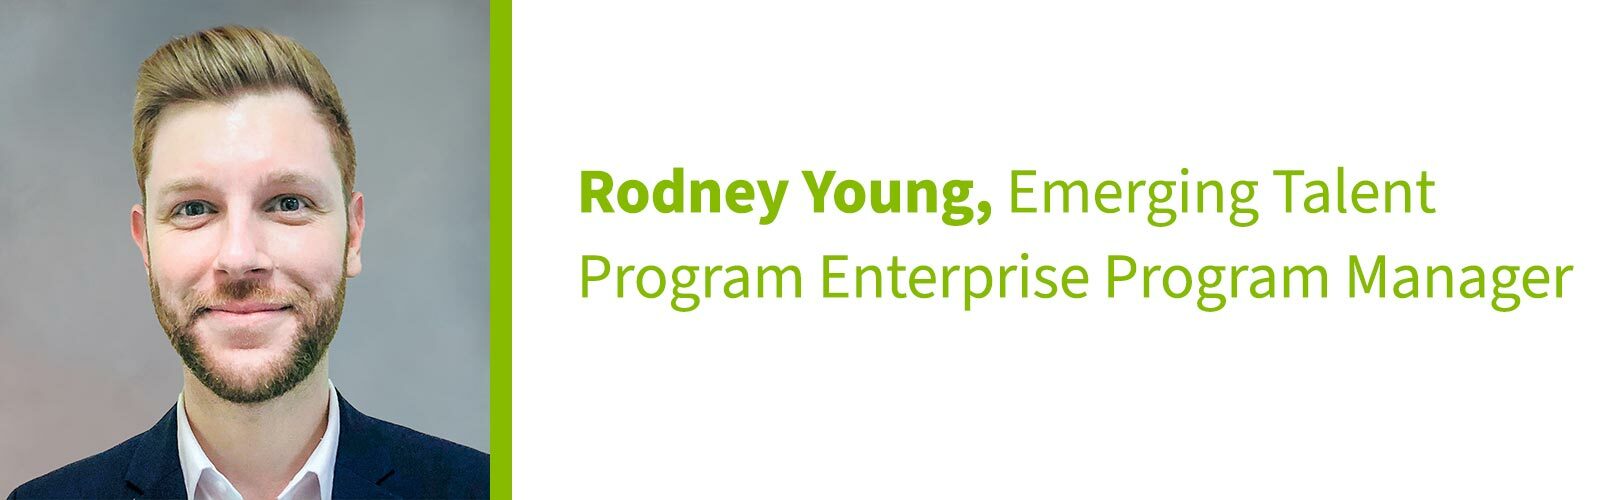 Rodney Young